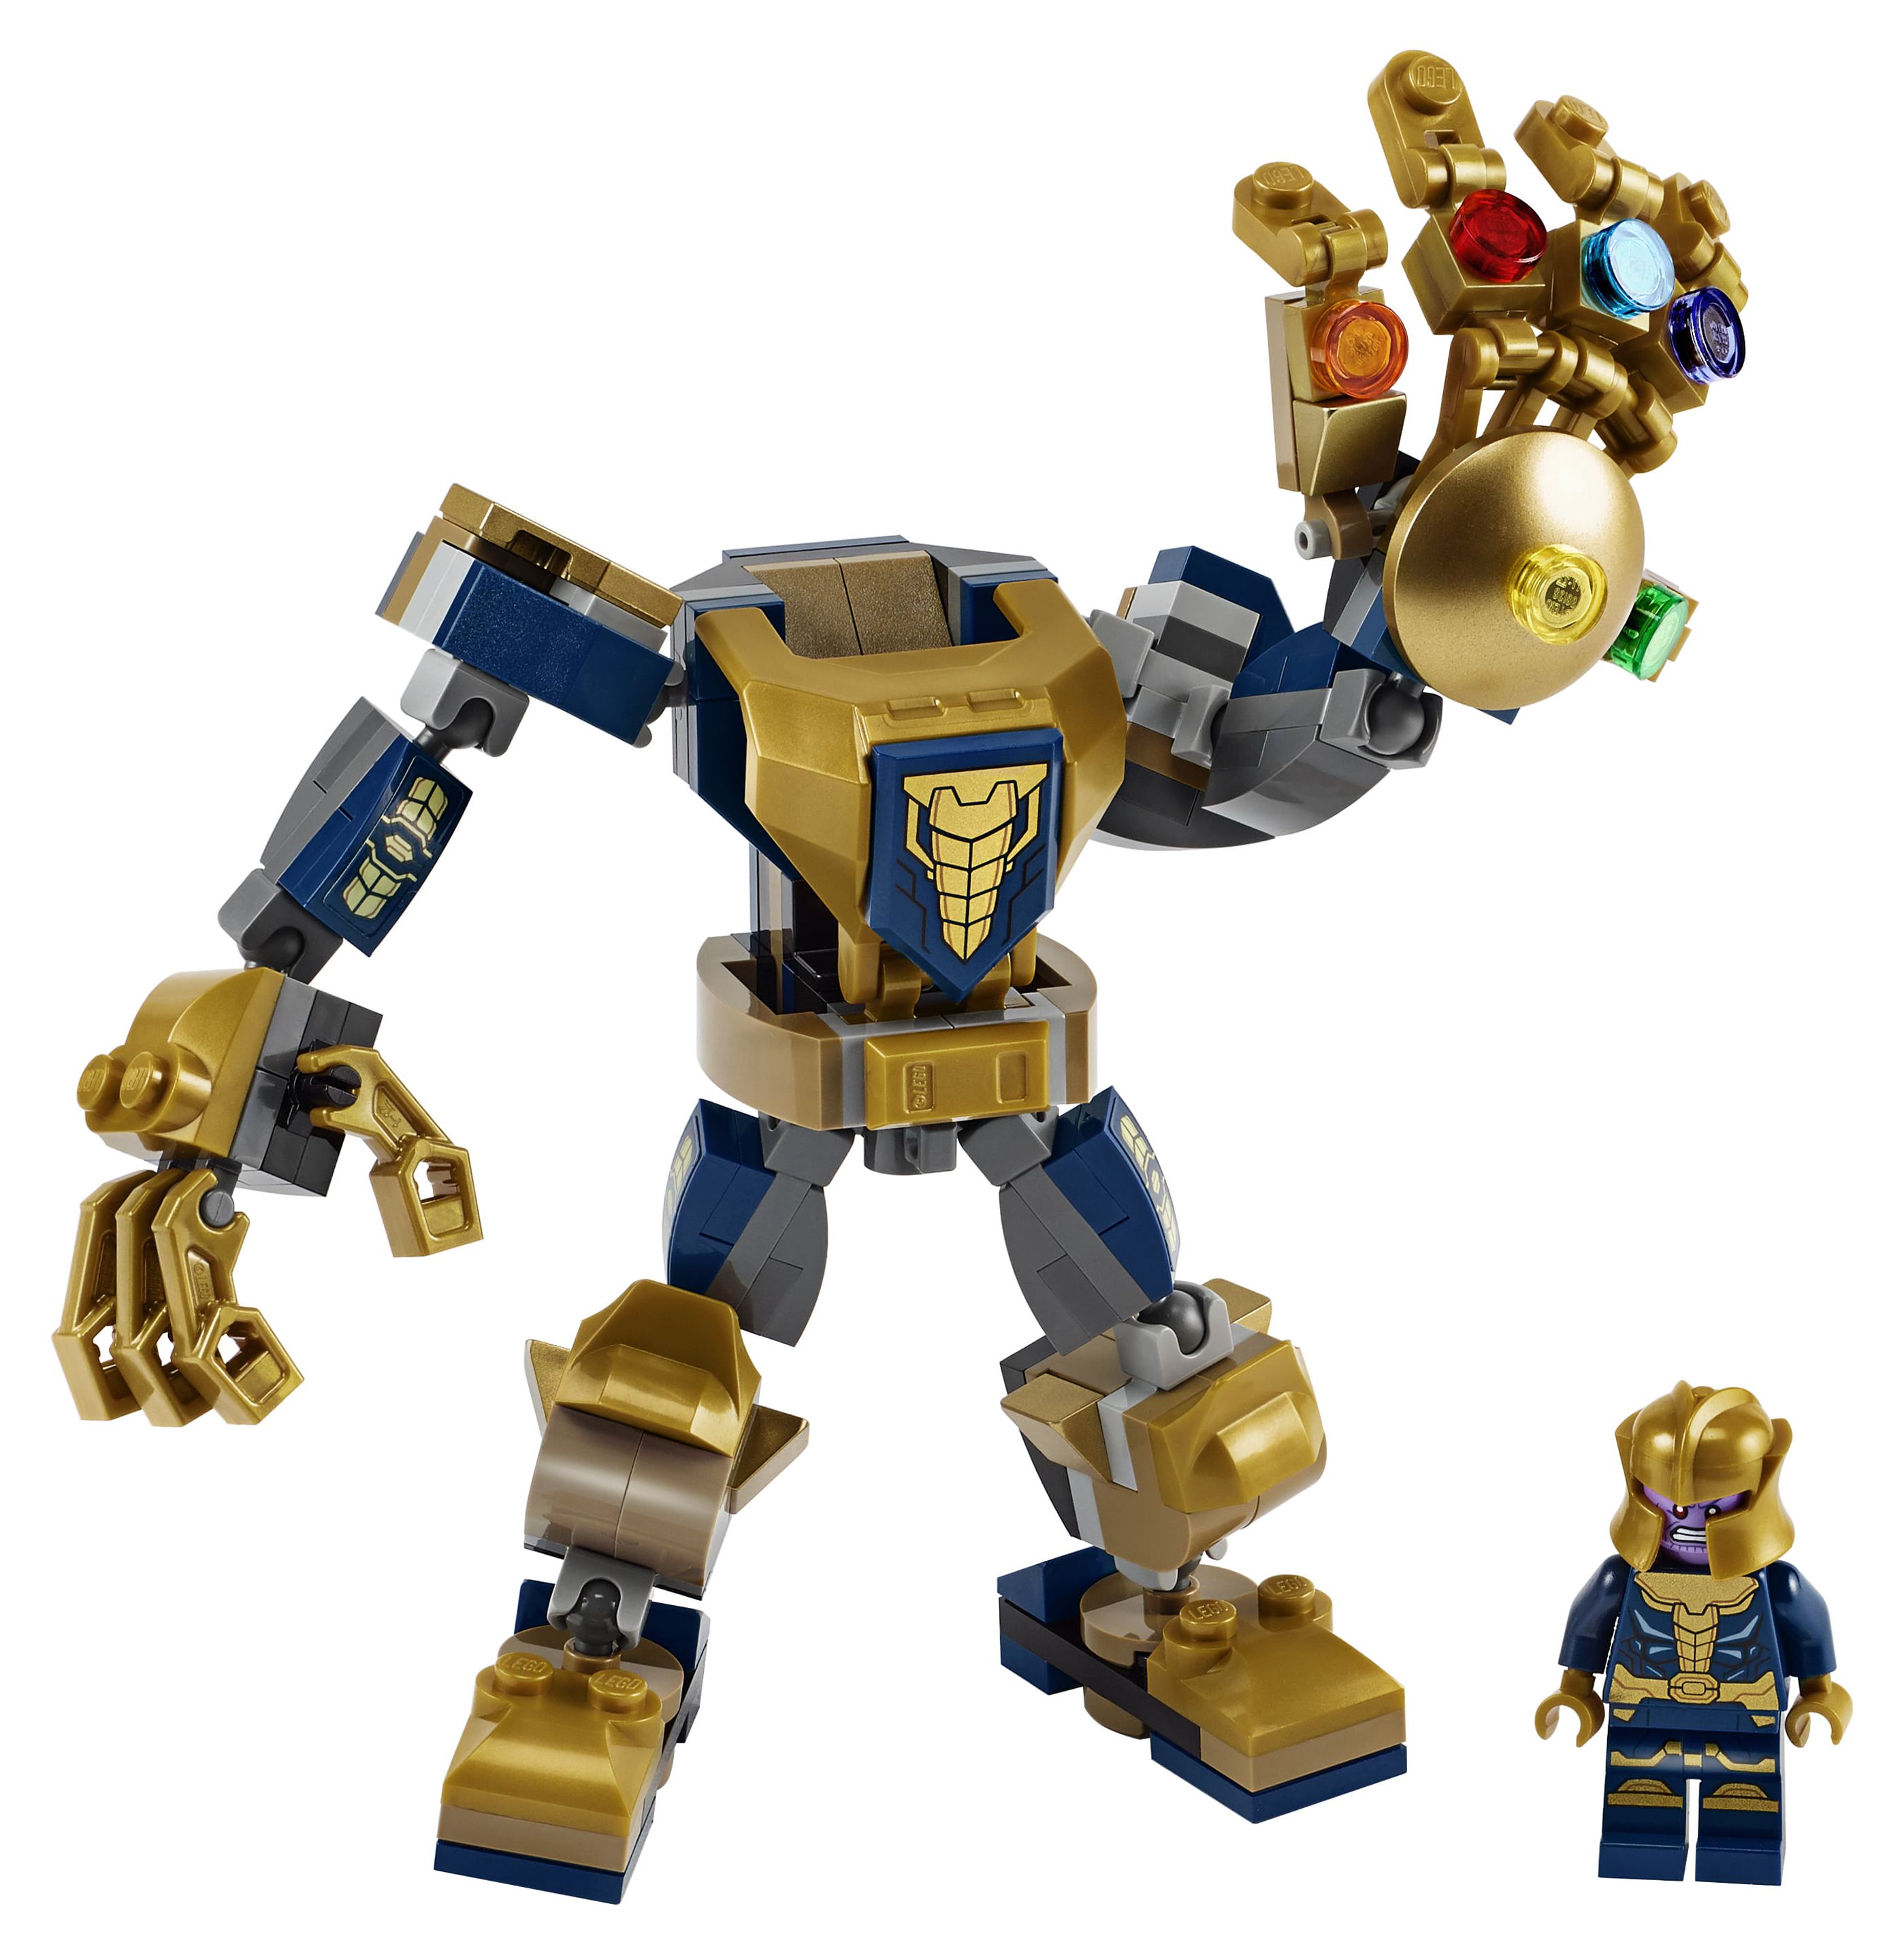 LEGO Super Heroes Avengers Thanos Mech 76141 - image 3 of 7